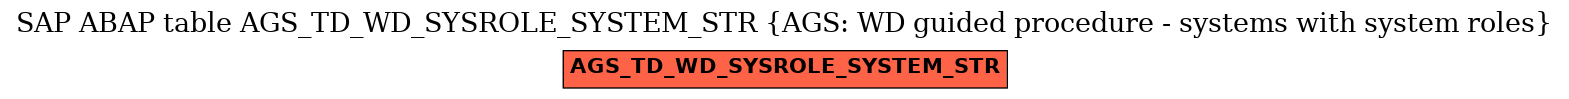 E-R Diagram for table AGS_TD_WD_SYSROLE_SYSTEM_STR (AGS: WD guided procedure - systems with system roles)